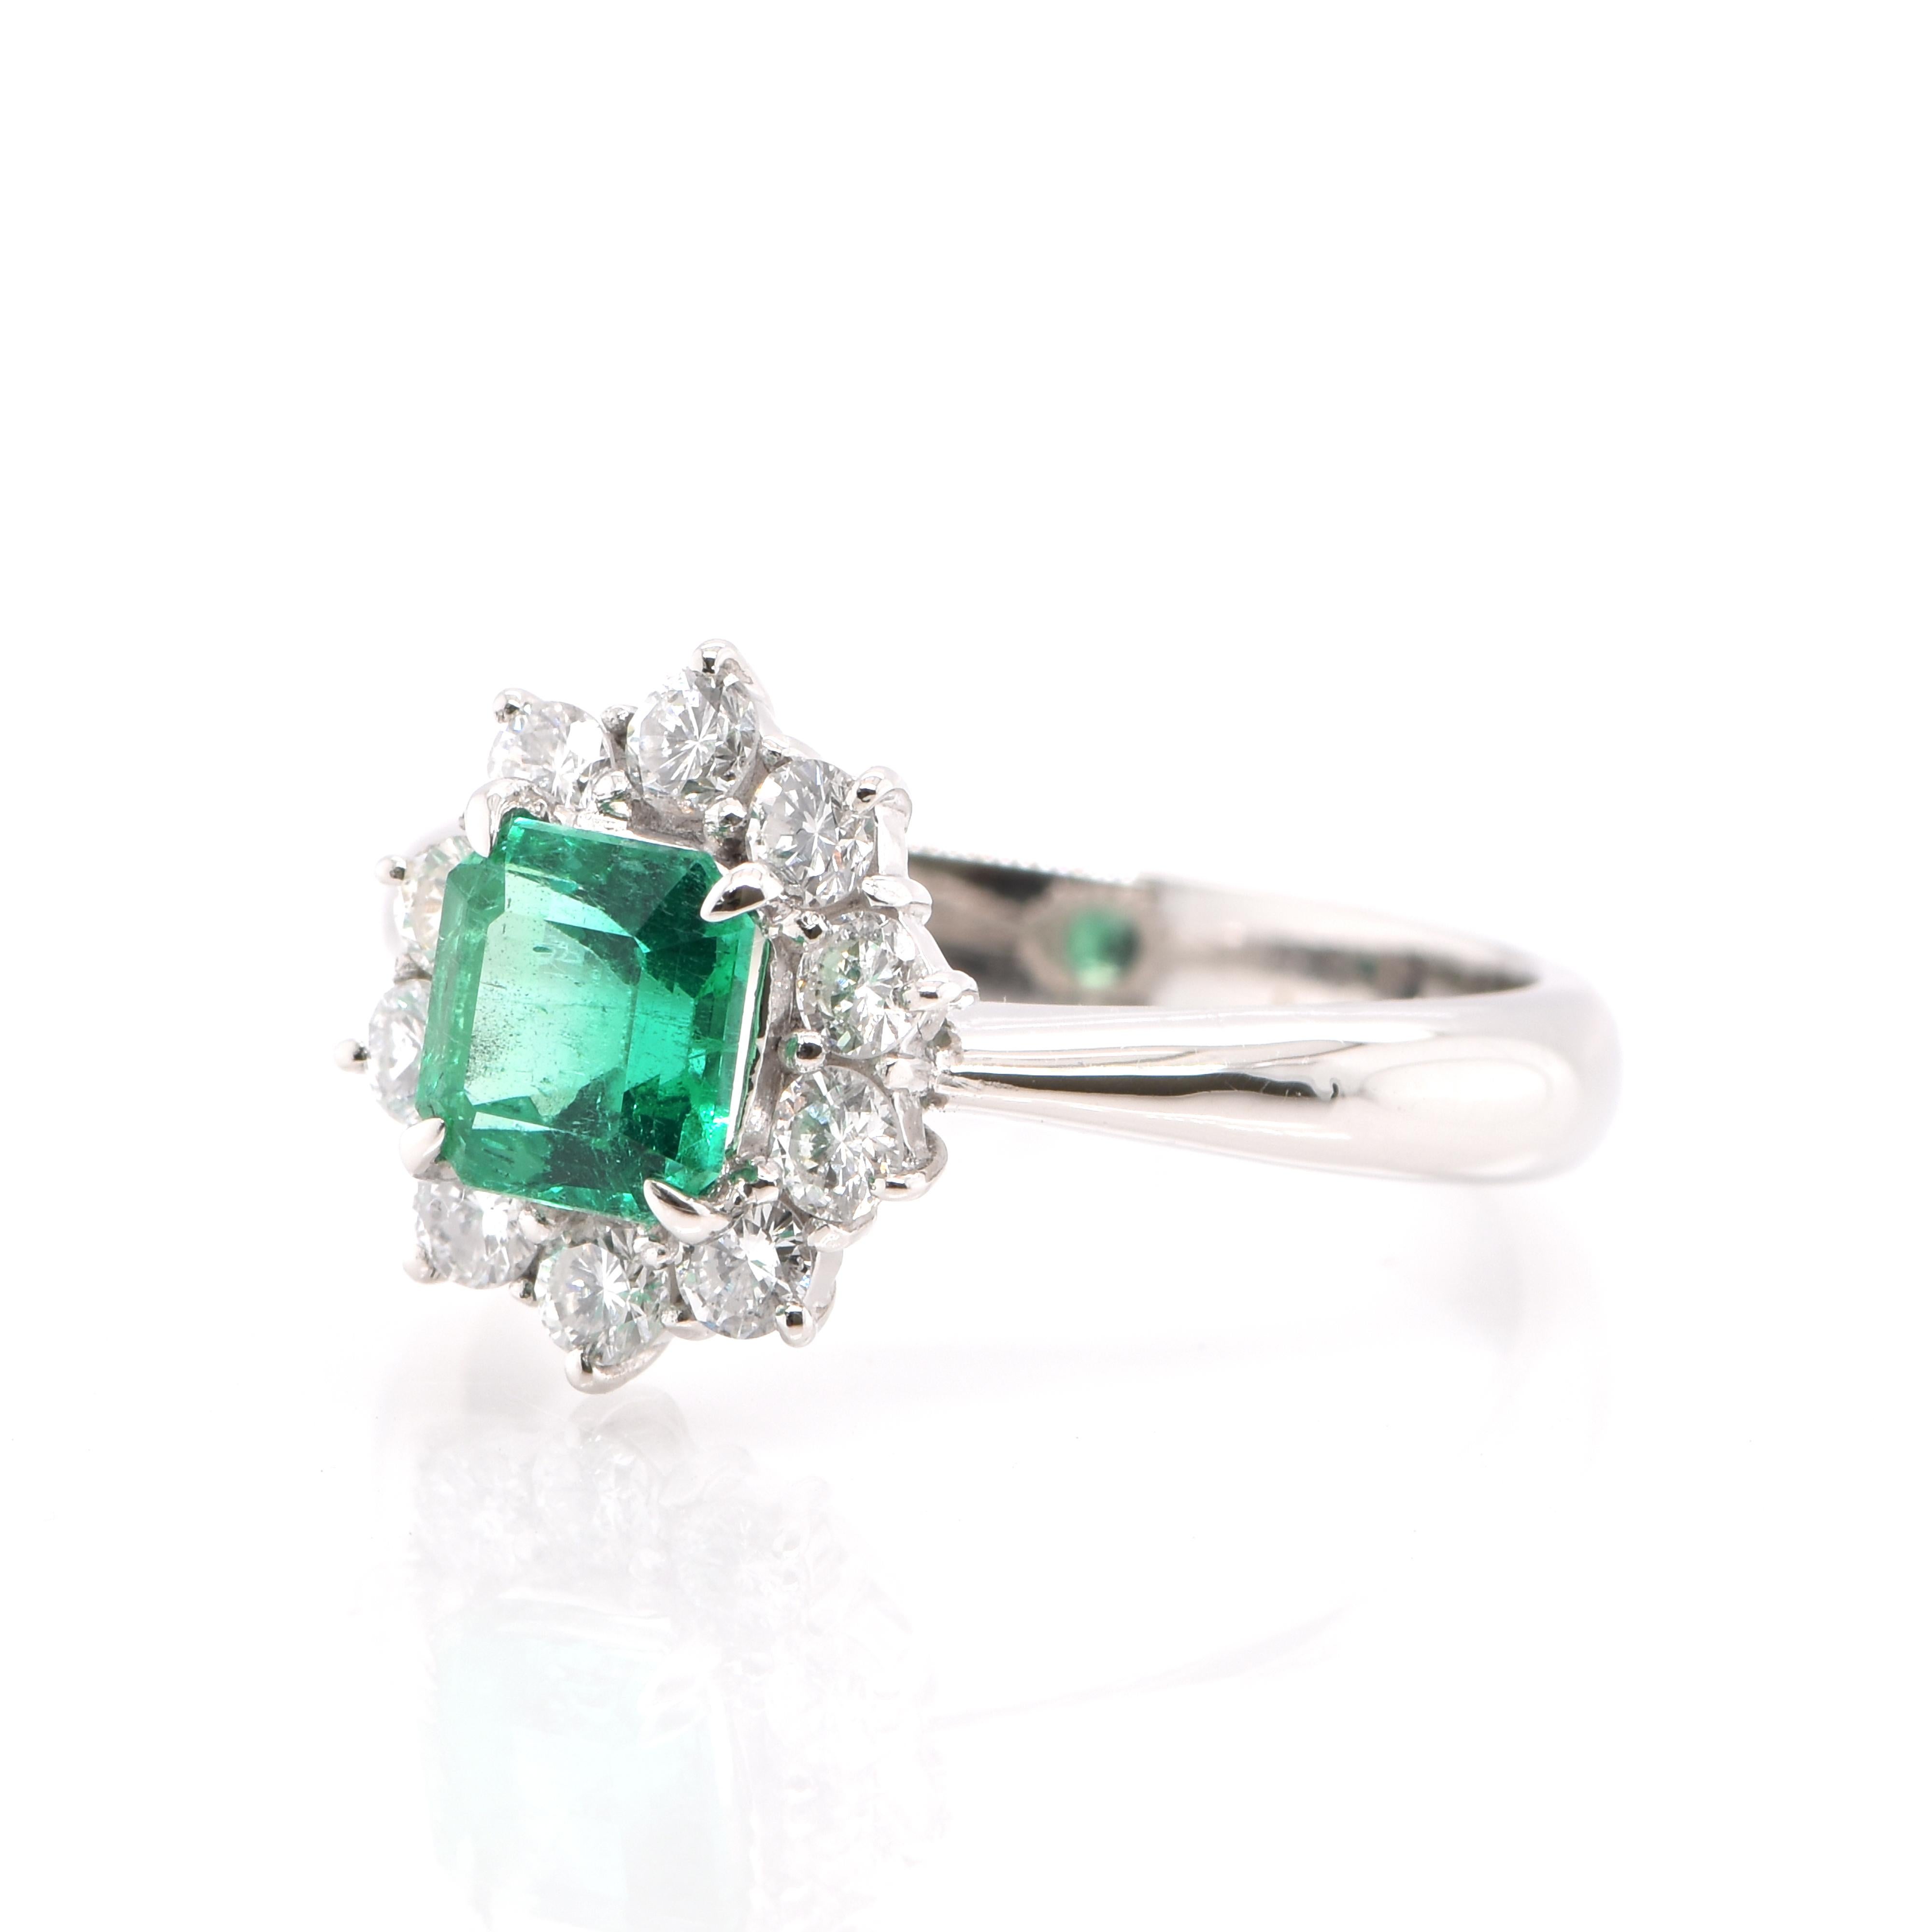 A stunning Engagement Ring featuring a 0.86 Carat Natural Emerald and 0.49 Carats of Diamond Accents set in Platinum. People have admired emerald’s green for thousands of years. Emeralds have always been associated with the lushest landscapes and